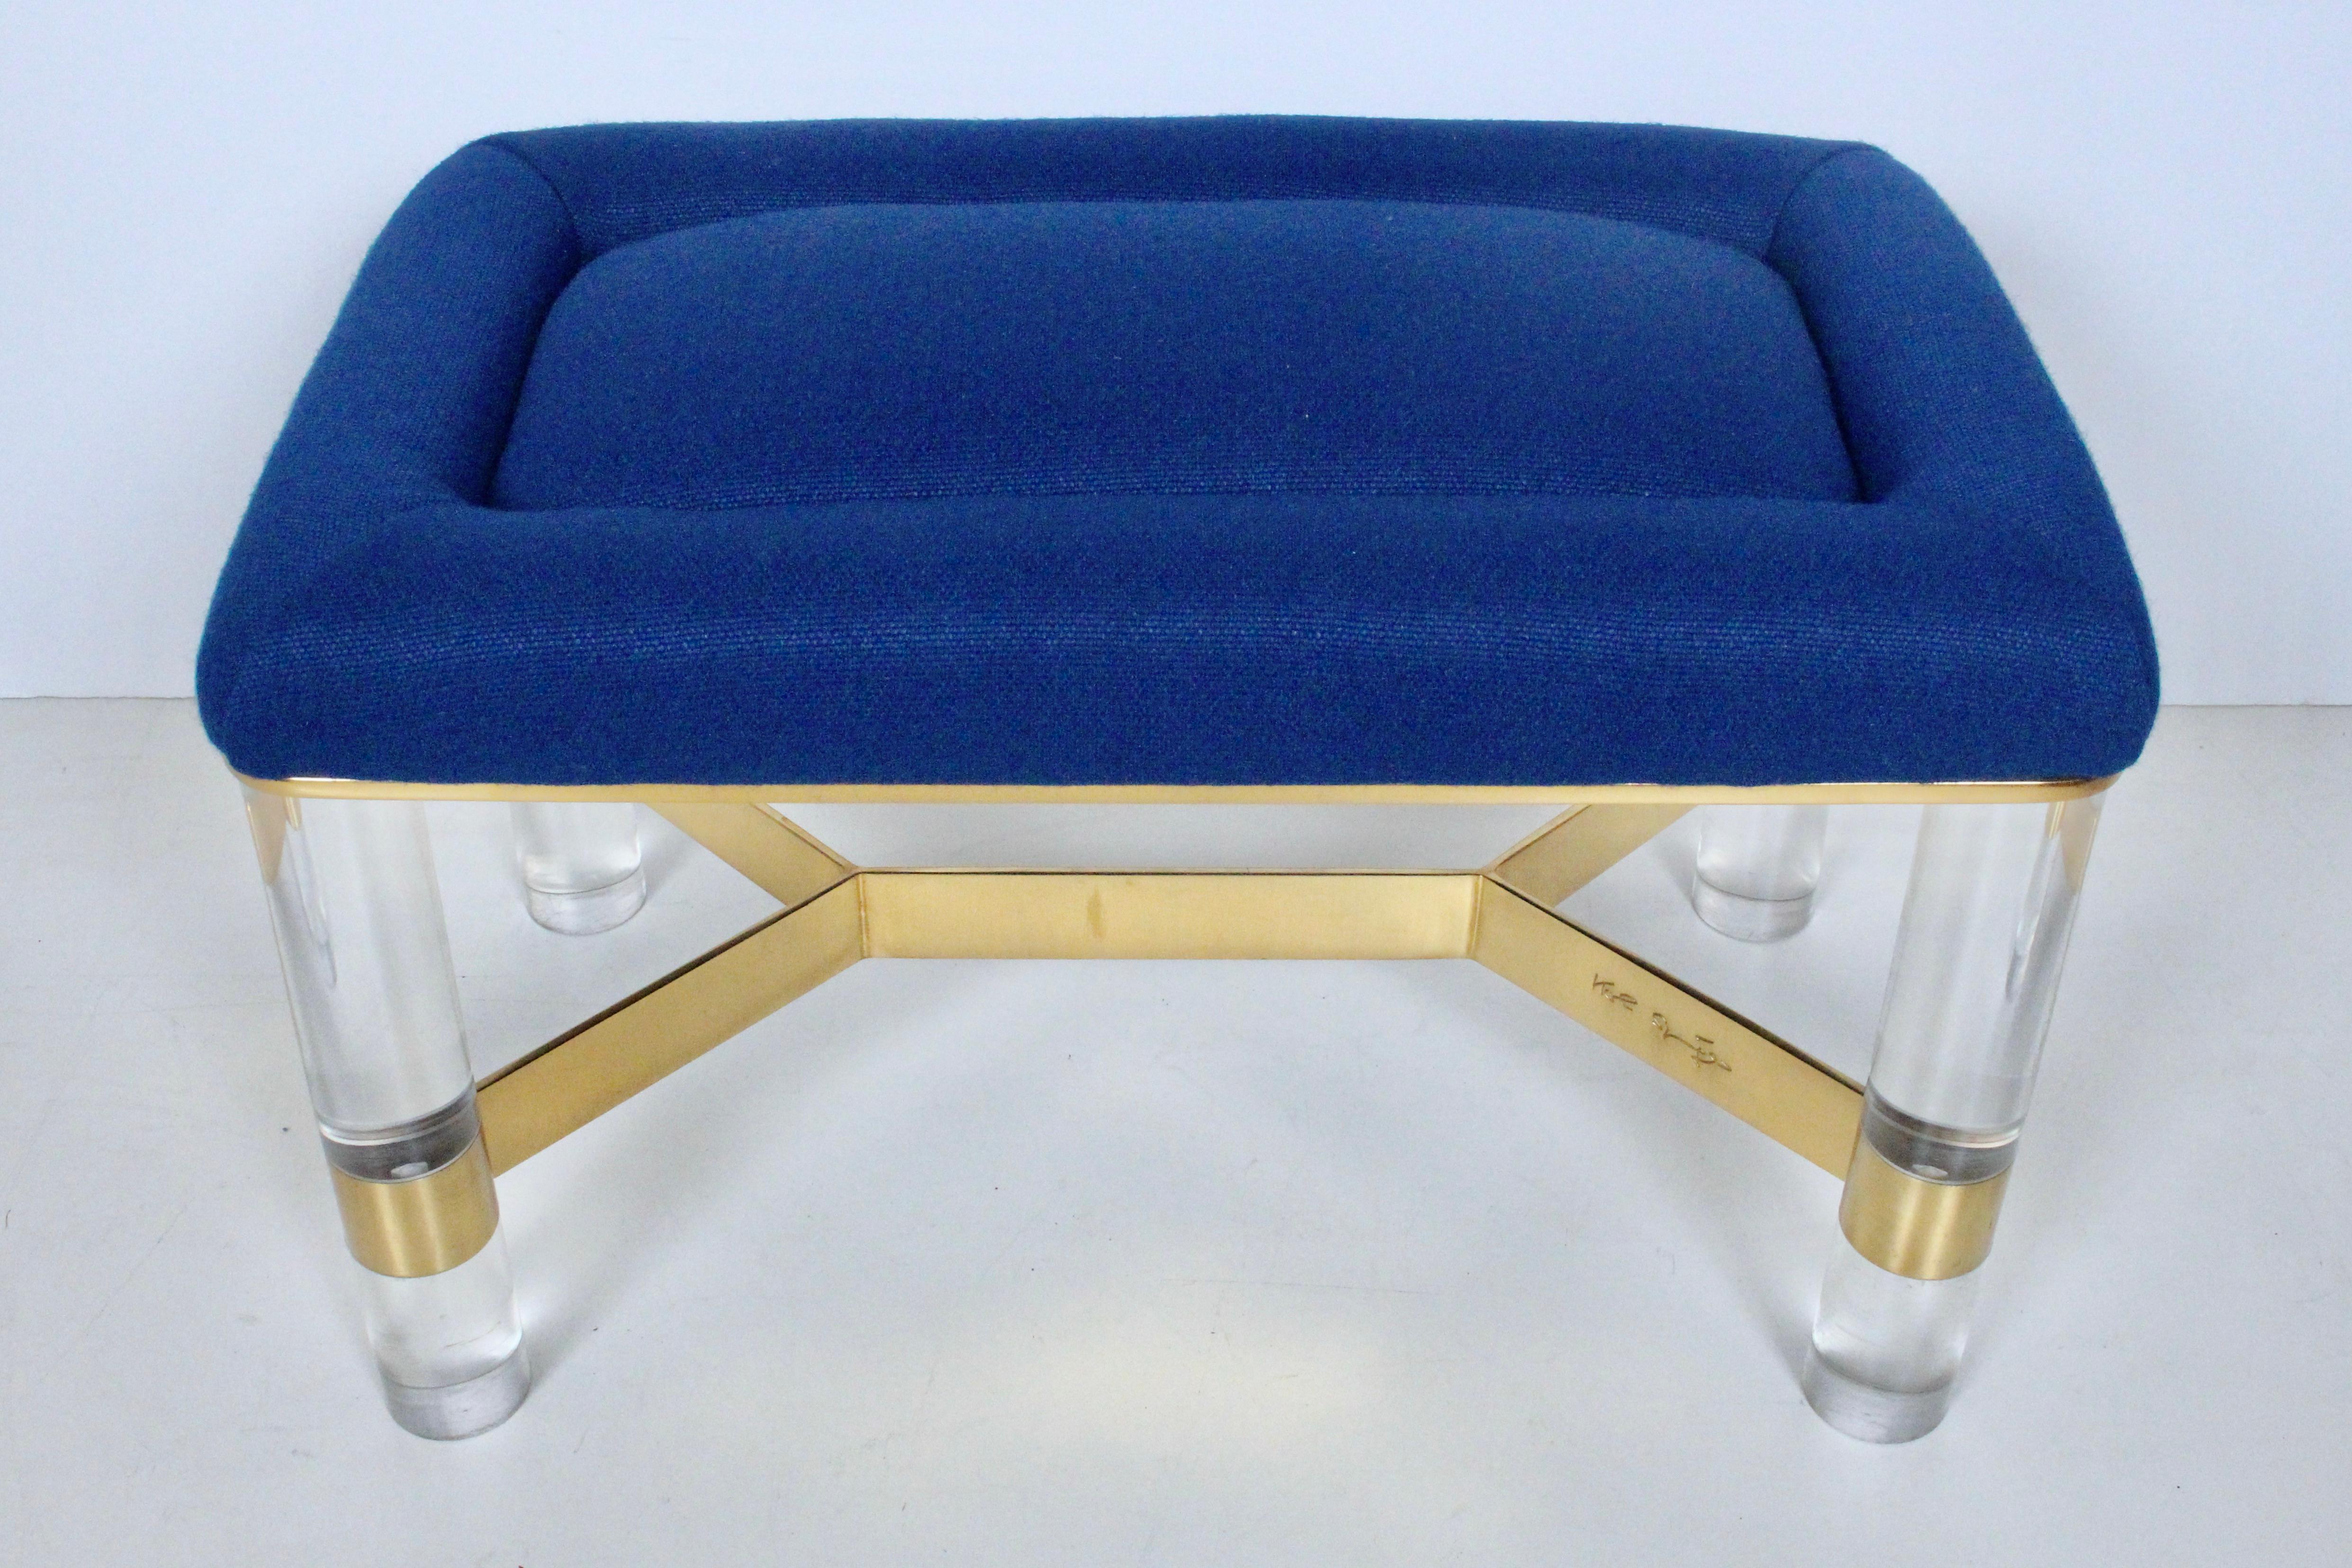 Karl Springer lucite and brass upholstered bench, stool, circa 1980. Featuring a braced rectangular polished brass cross bar frame, four solid cylindrical lucite legs with tufted, luxe woven upholstery. Signed Karl Springer. Kindly note that